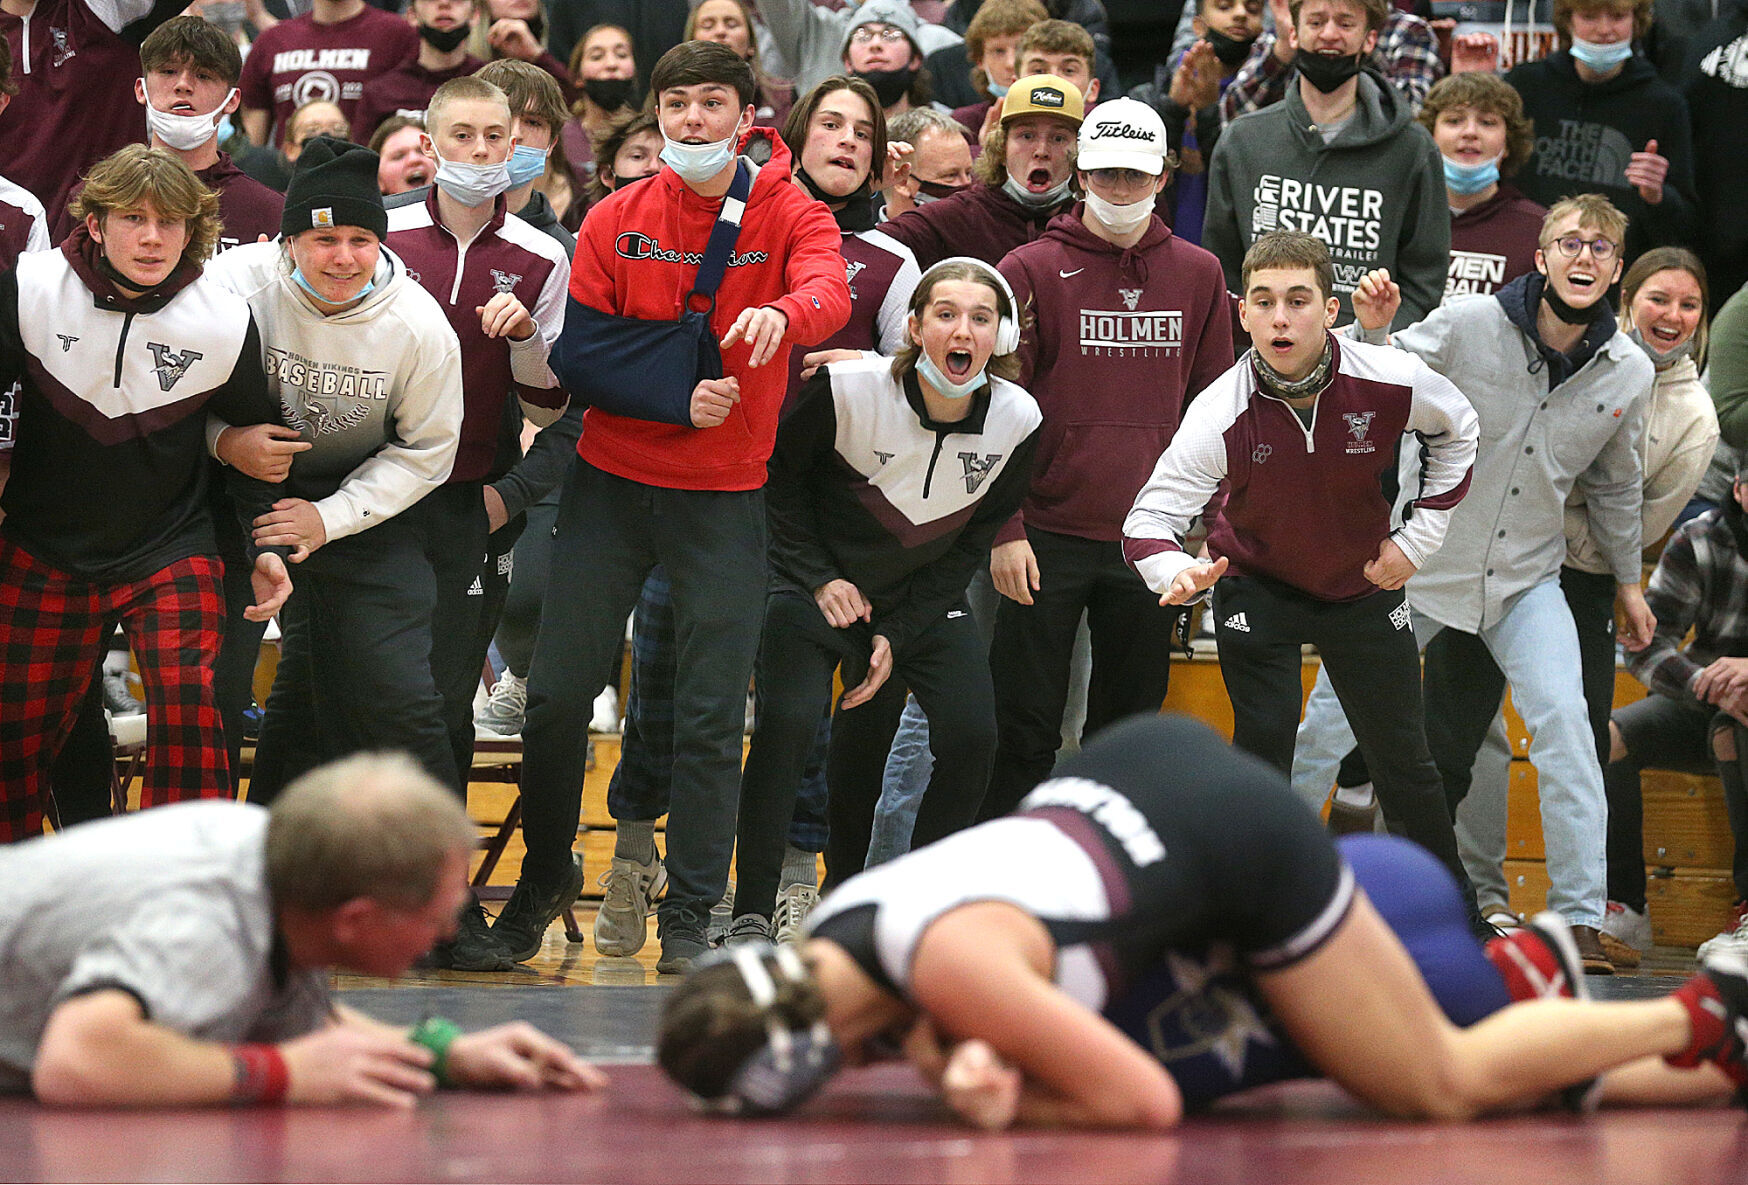 High school wrestling Jaida Harshman rose to the occasion for the Vikings photo